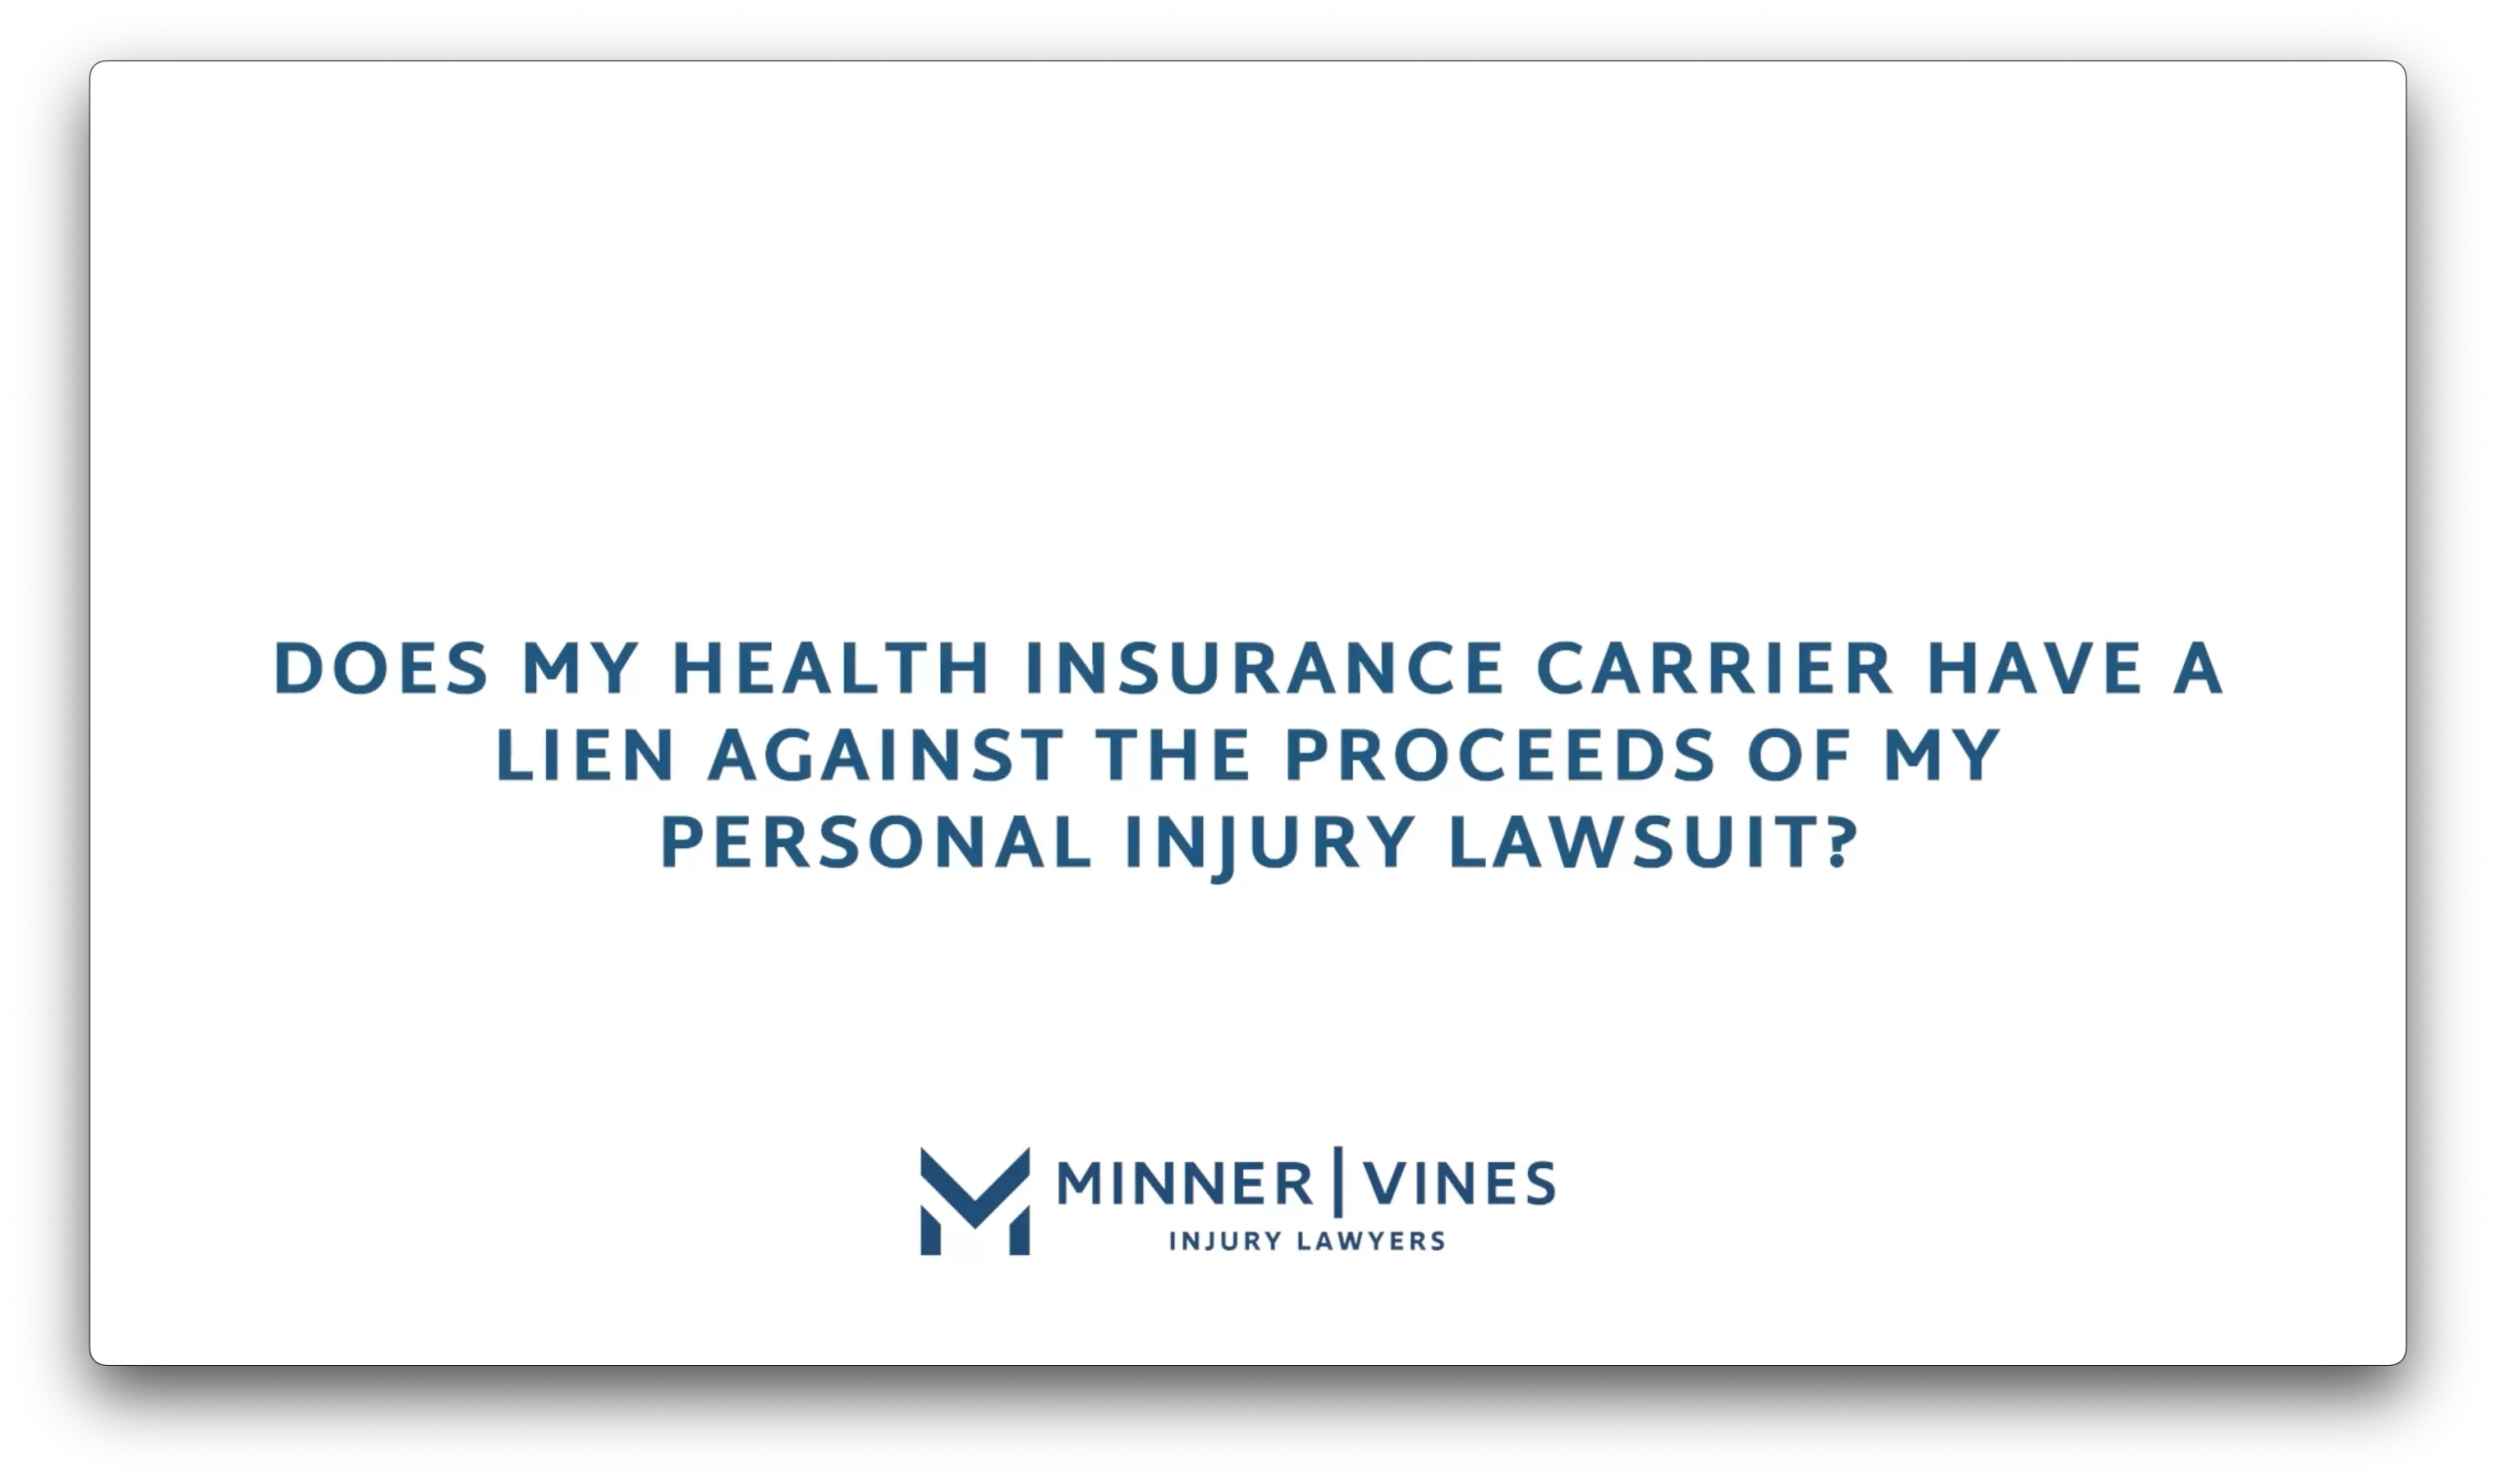 Does my health insurance carrier have a lien against the proceeds of my personal injury lawsuit?